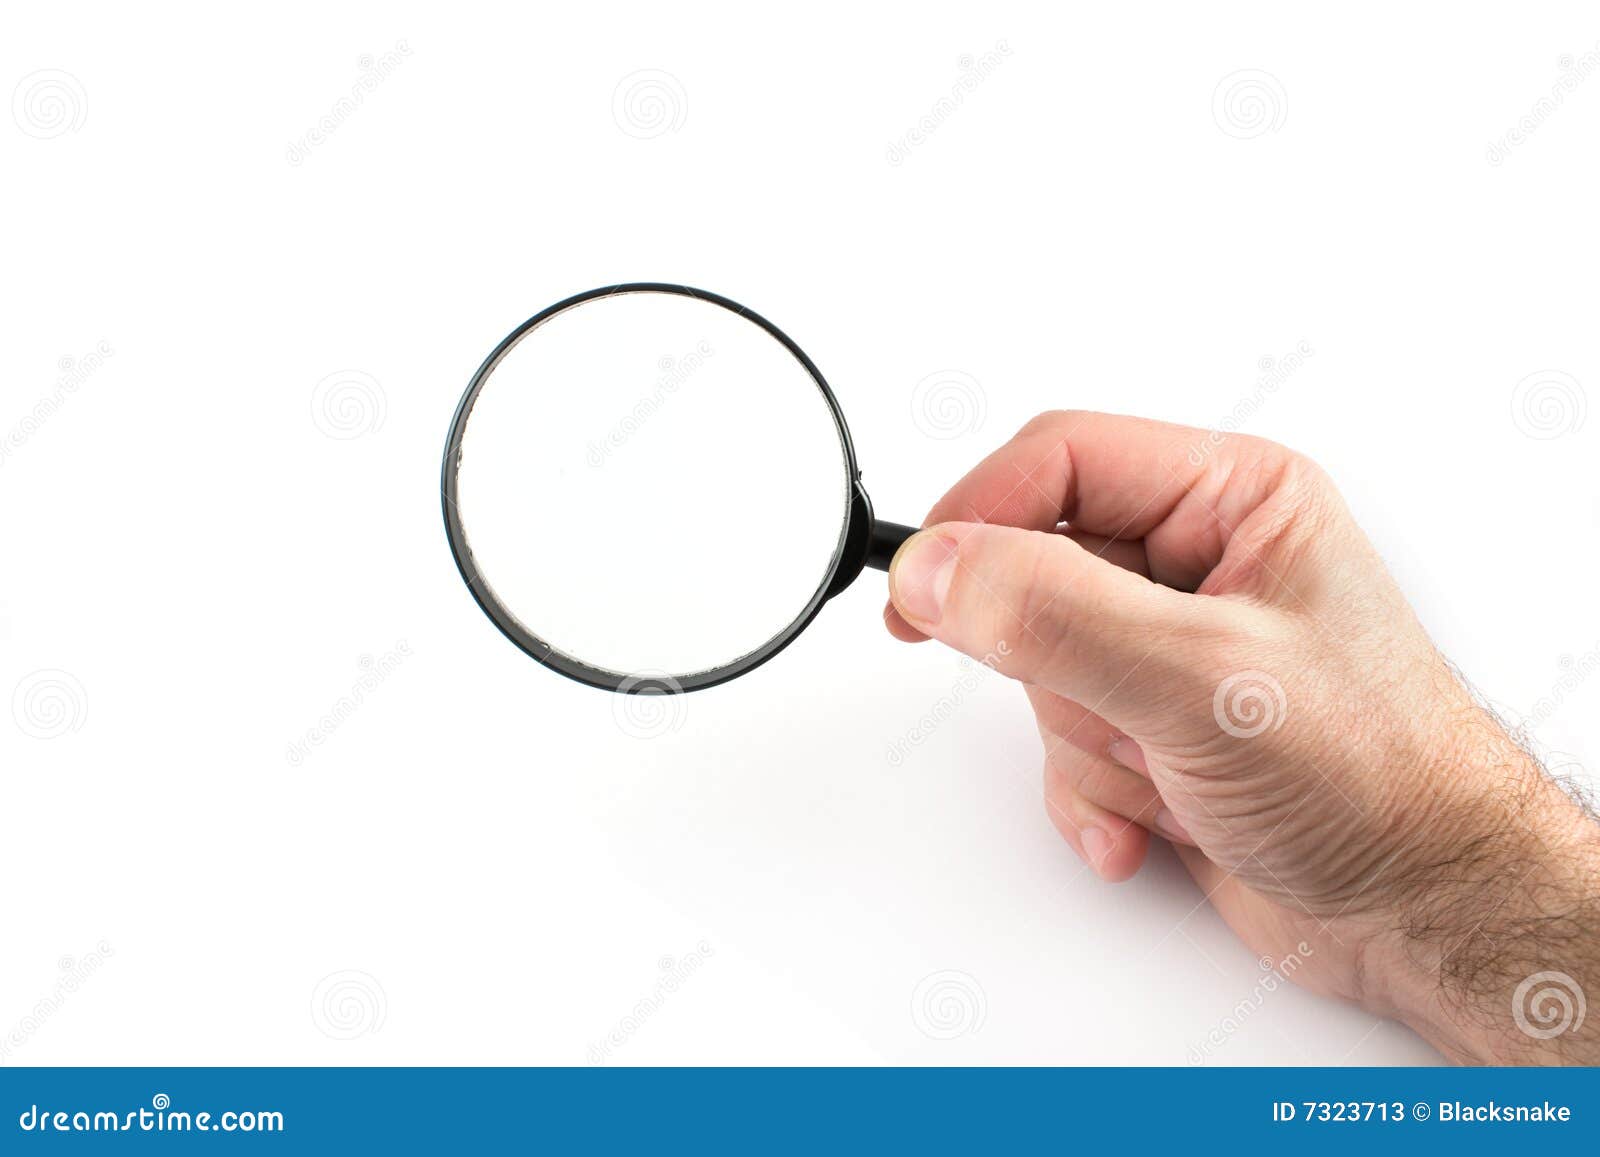 magnifier in hand inspect or examine